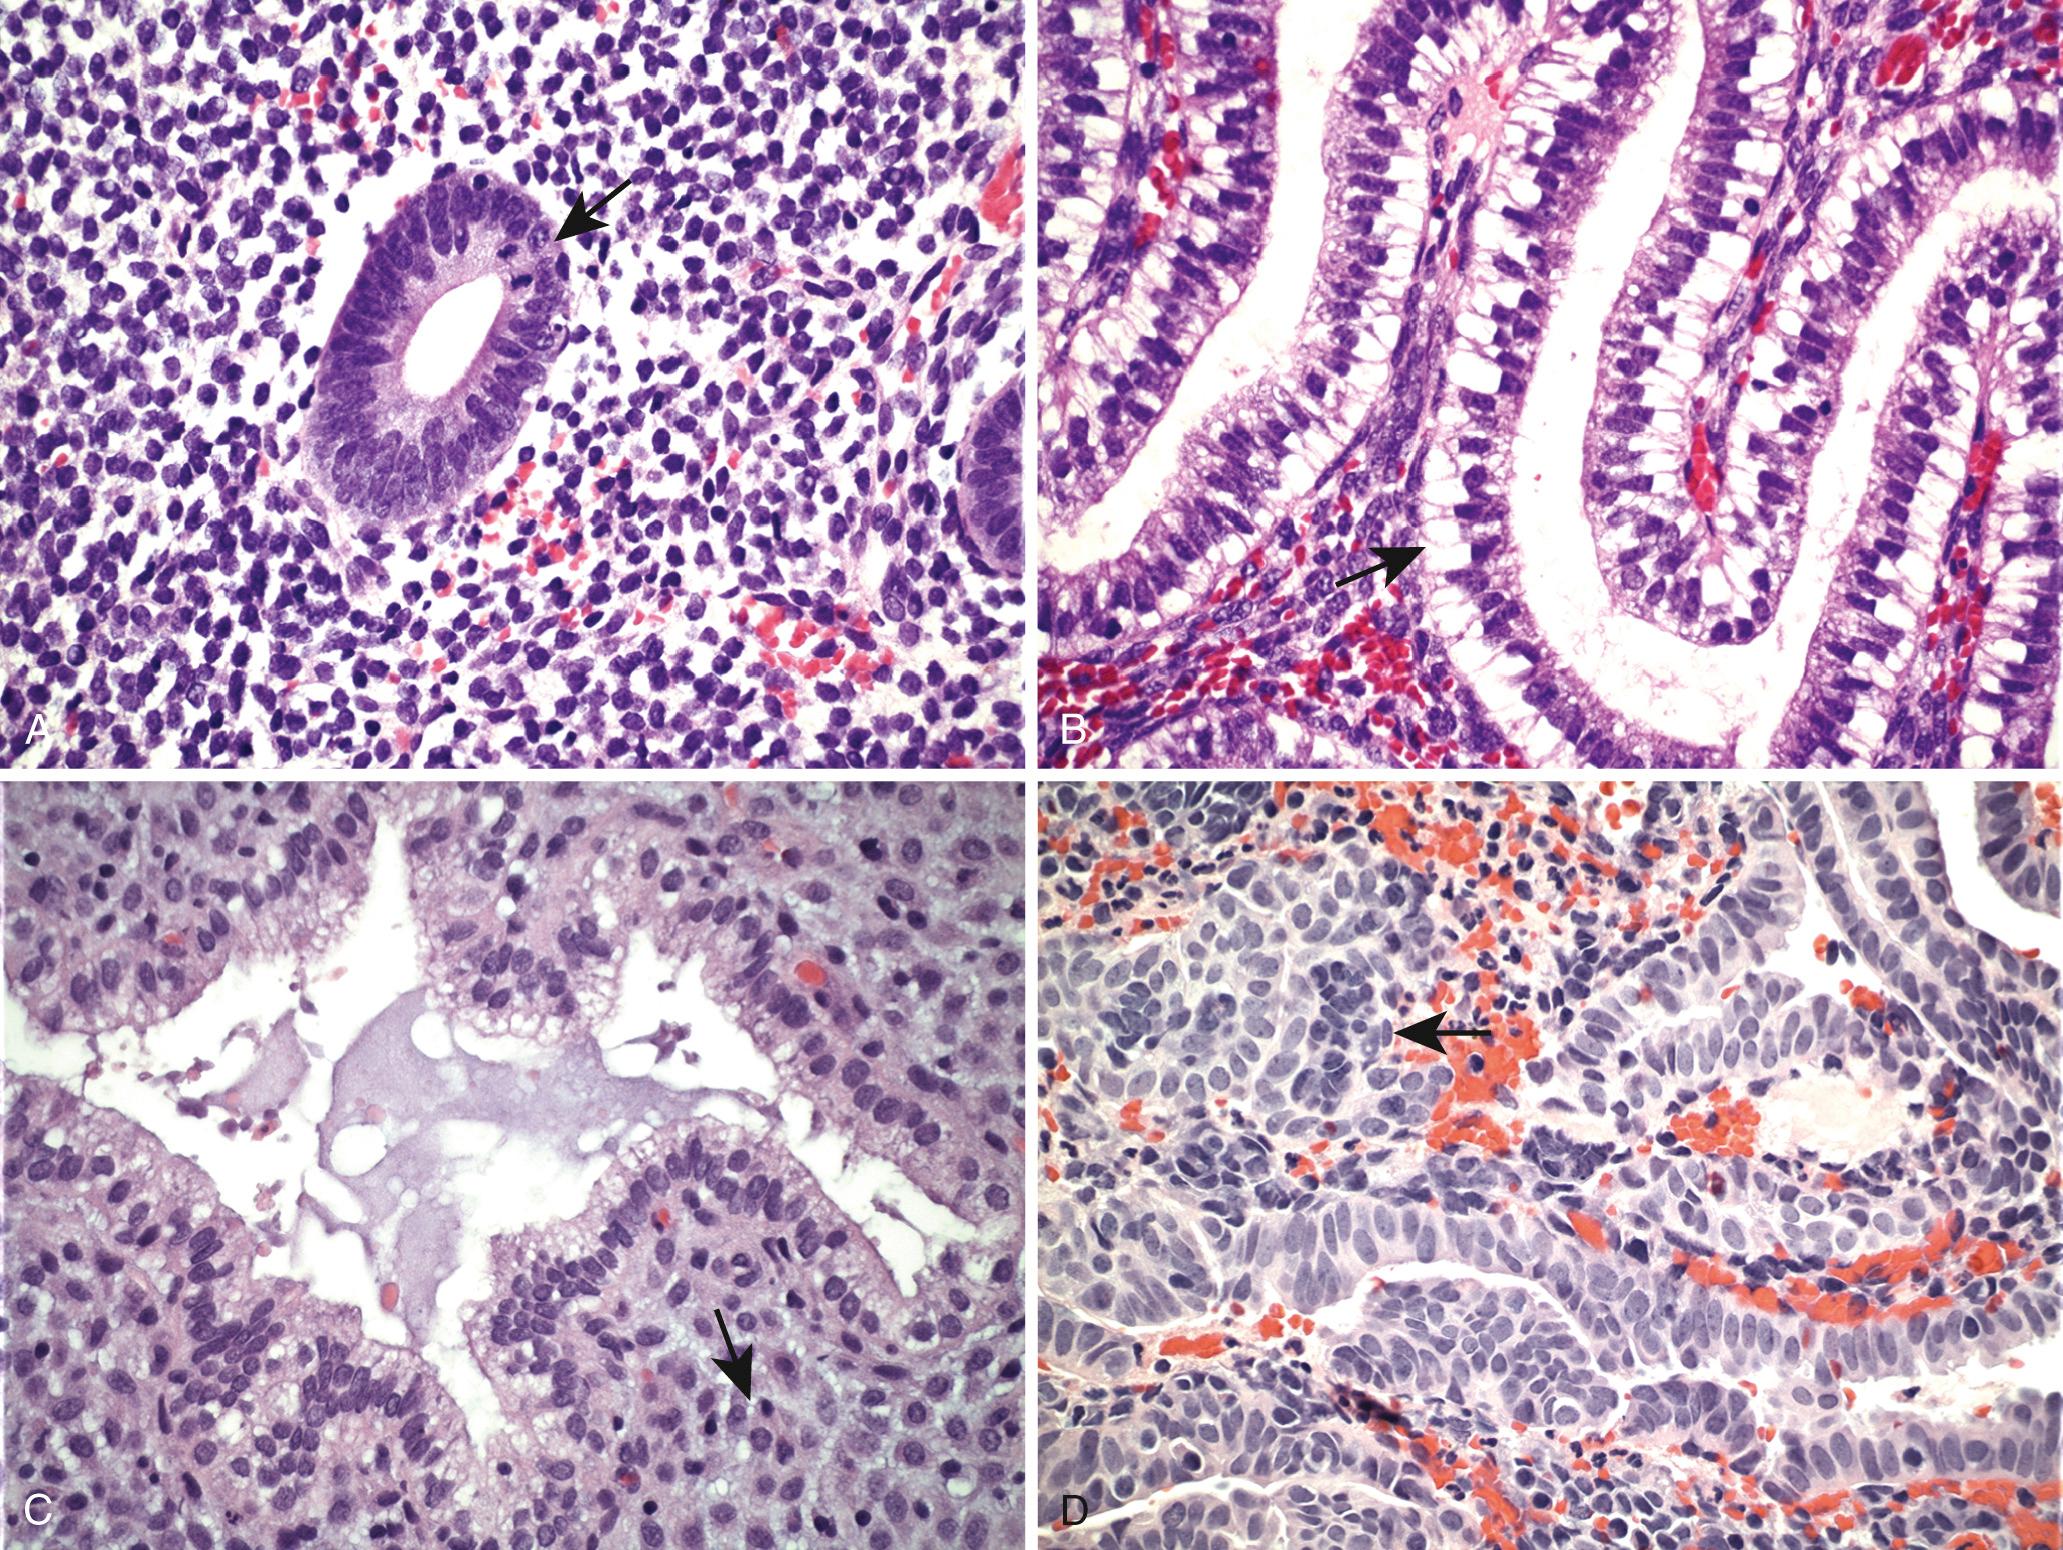 Figure 22.19, Histology of the menstrual cycle. (A) Proliferative phase with mitoses (arrow) . (B) Early secretory phase with subnuclear vacuoles (arrow) . (C) Late secretory exhaustion and predecidual changes (arrow) . (D) Menstrual endometrium with stromal breakdown (arrow) (see text).